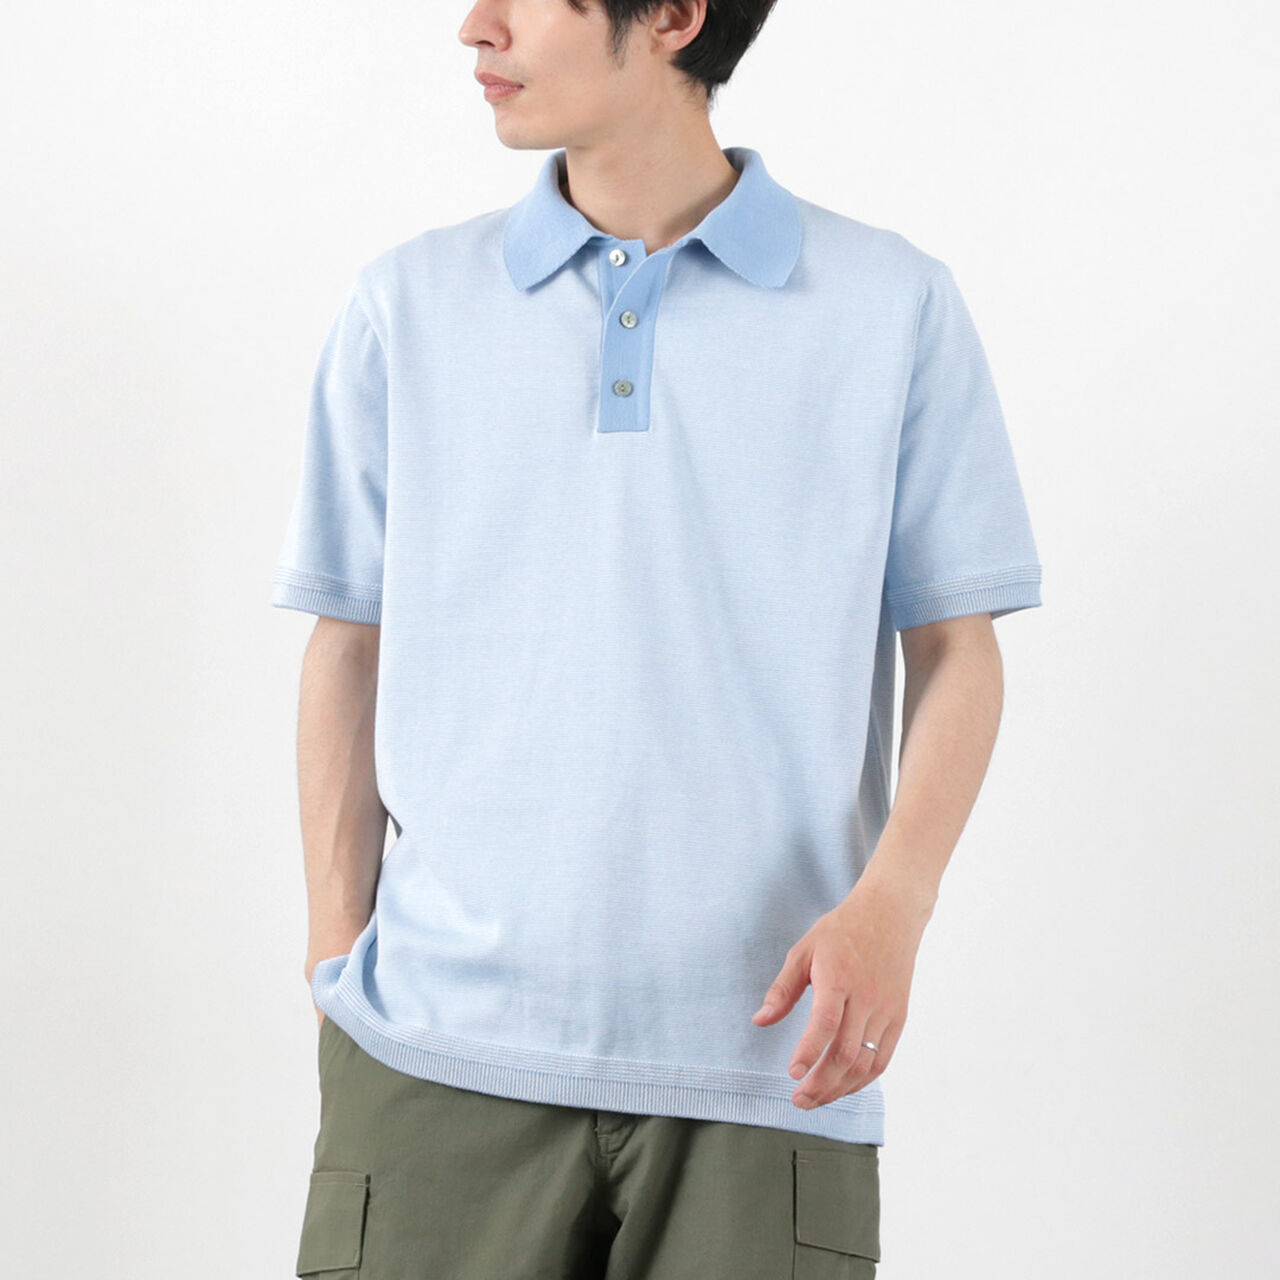 Knit Polo "Easy",BlueBorder, large image number 0